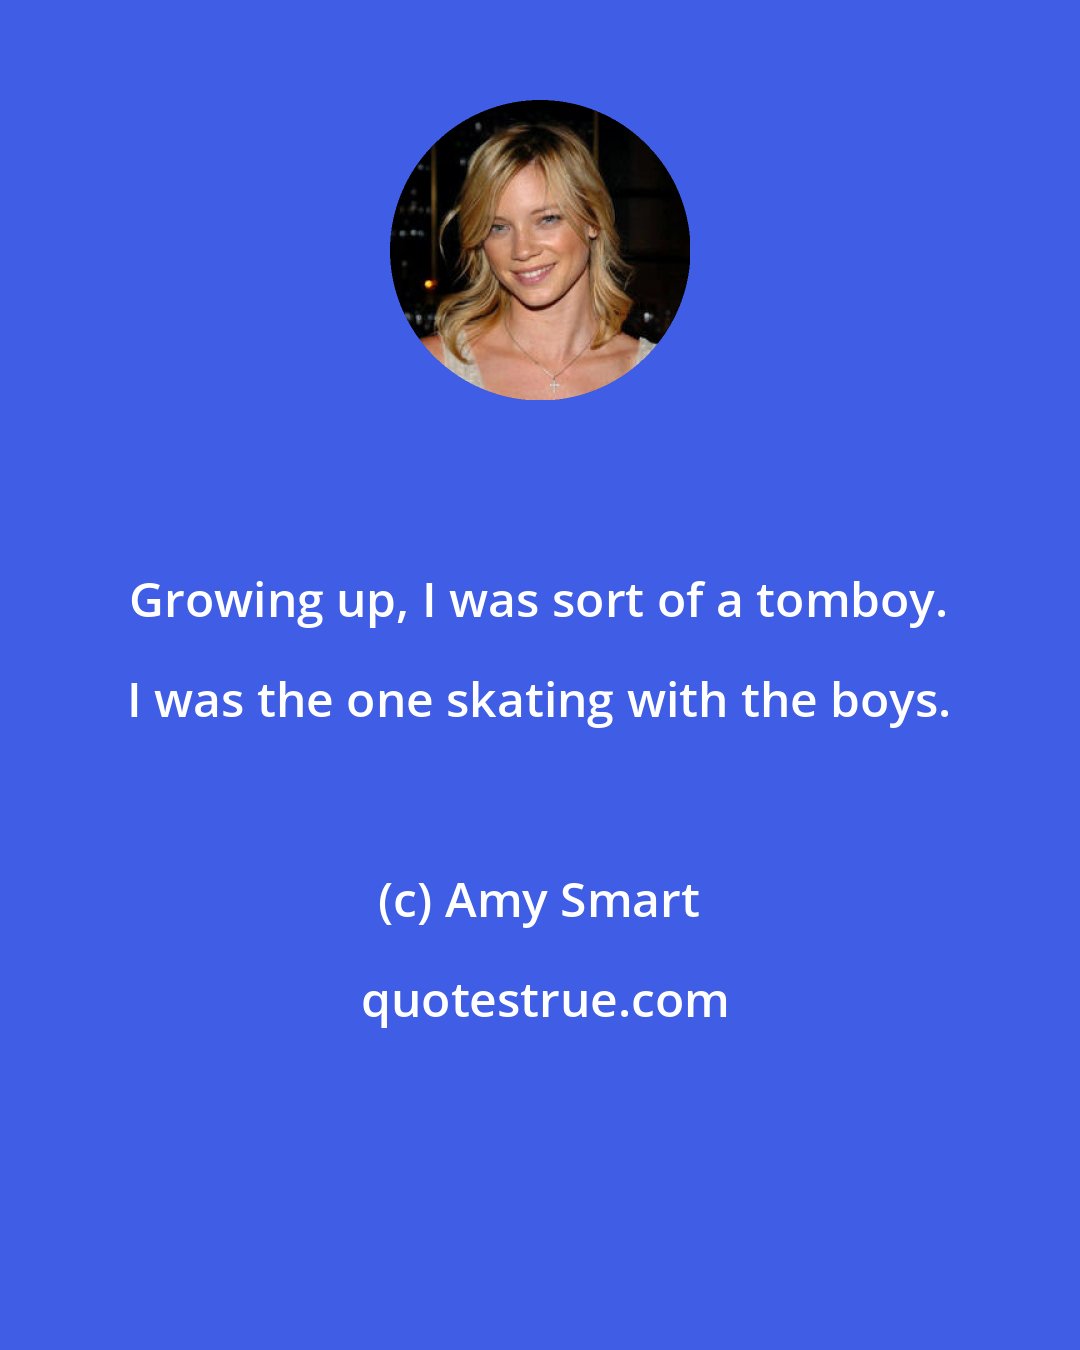 Amy Smart: Growing up, I was sort of a tomboy. I was the one skating with the boys.